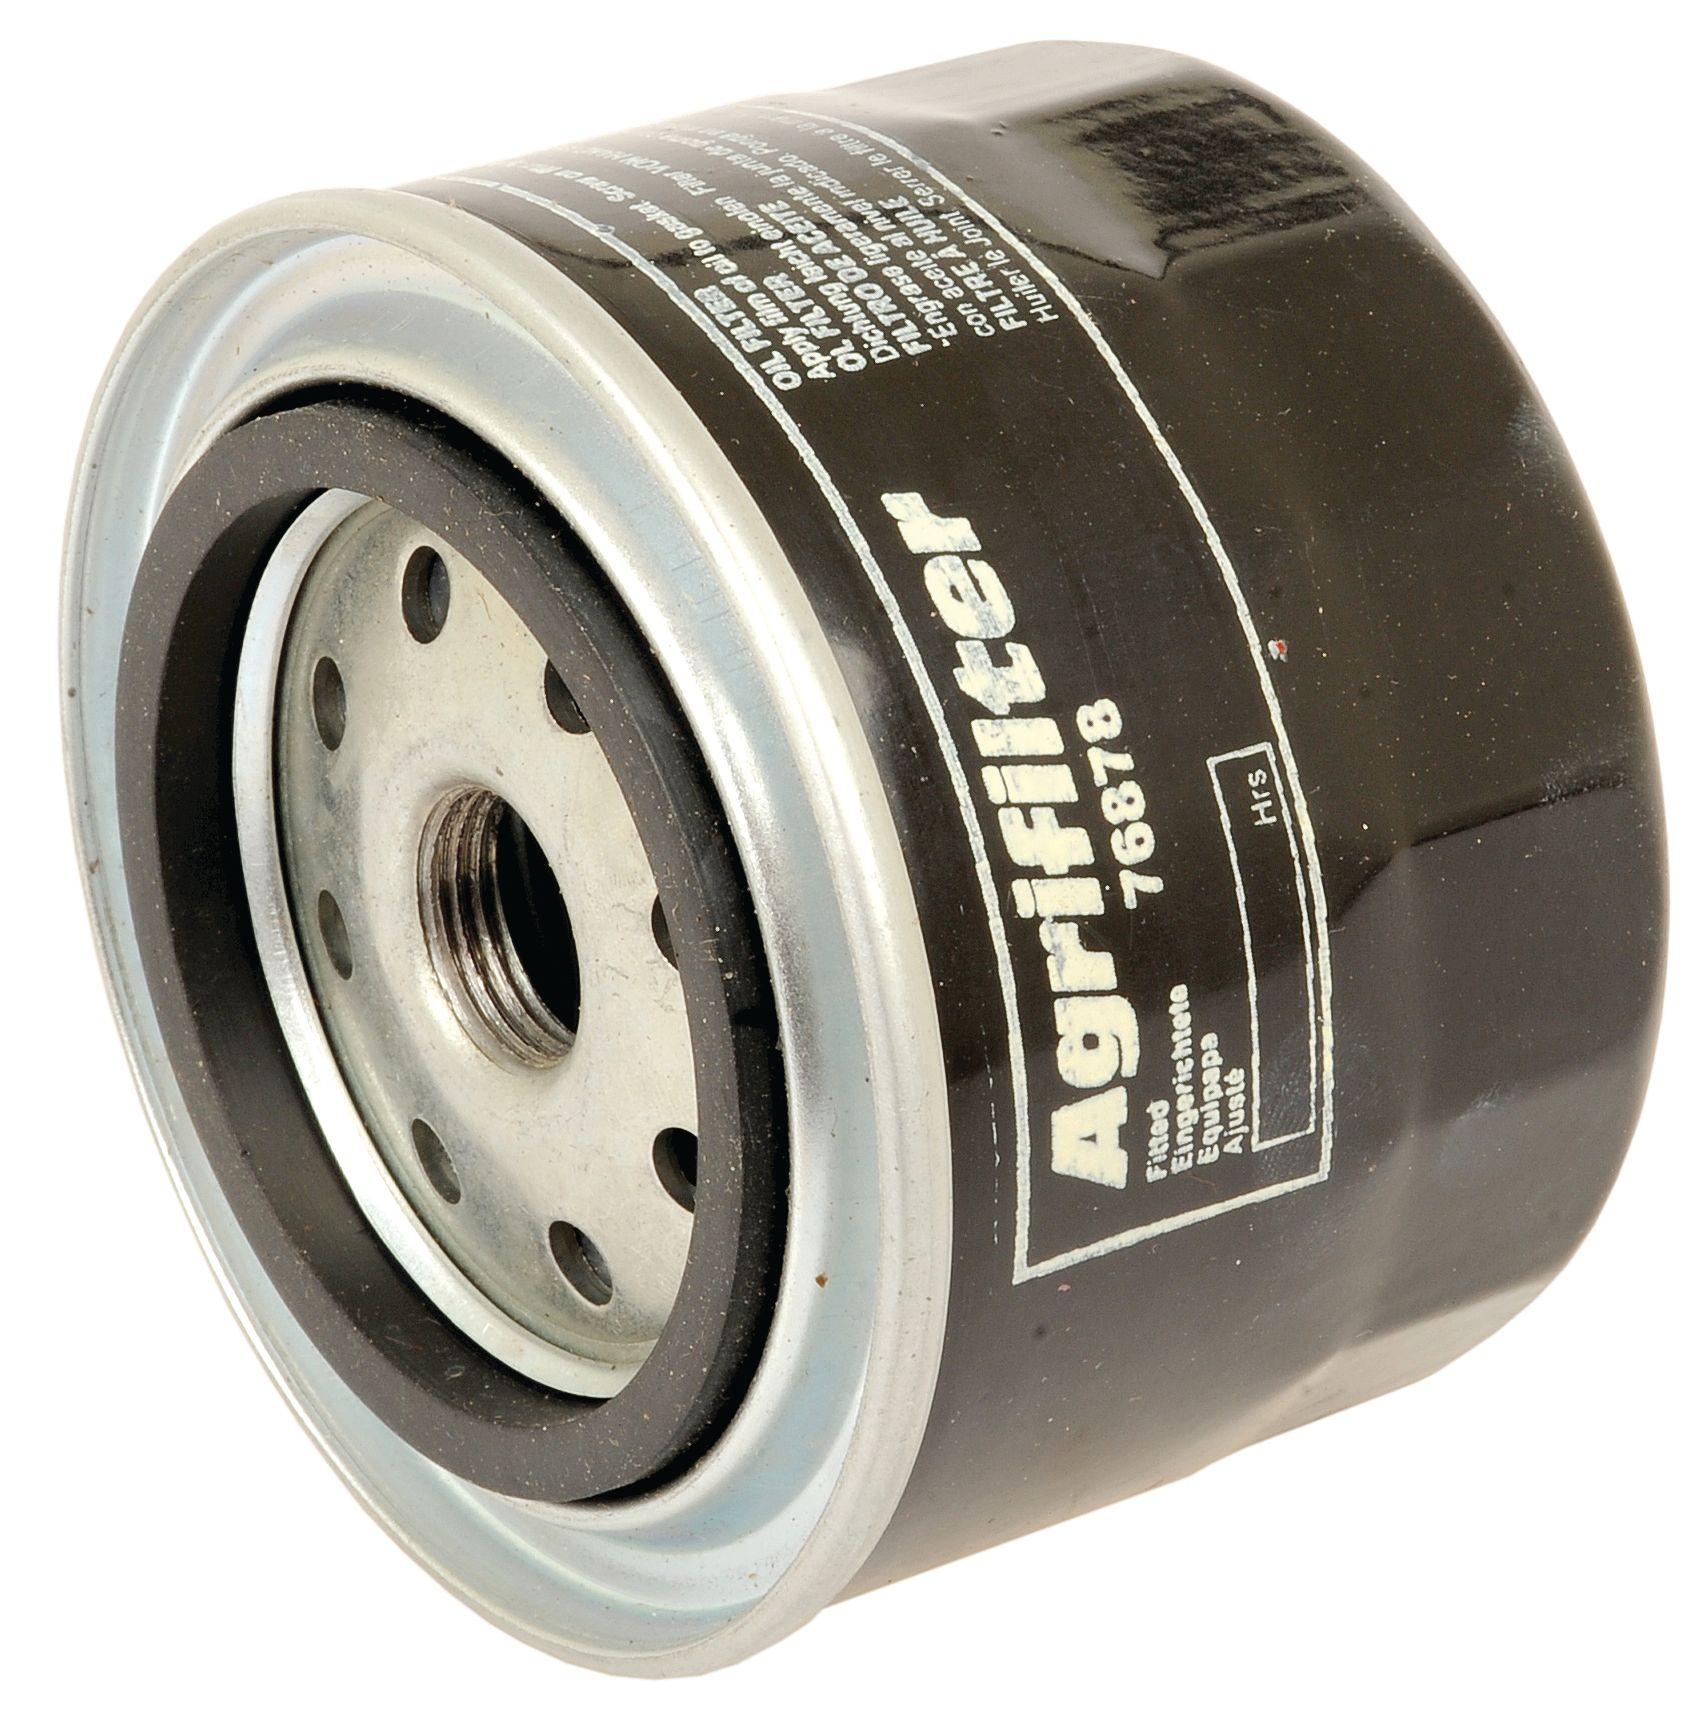 RANSOME OIL FILTER 76878